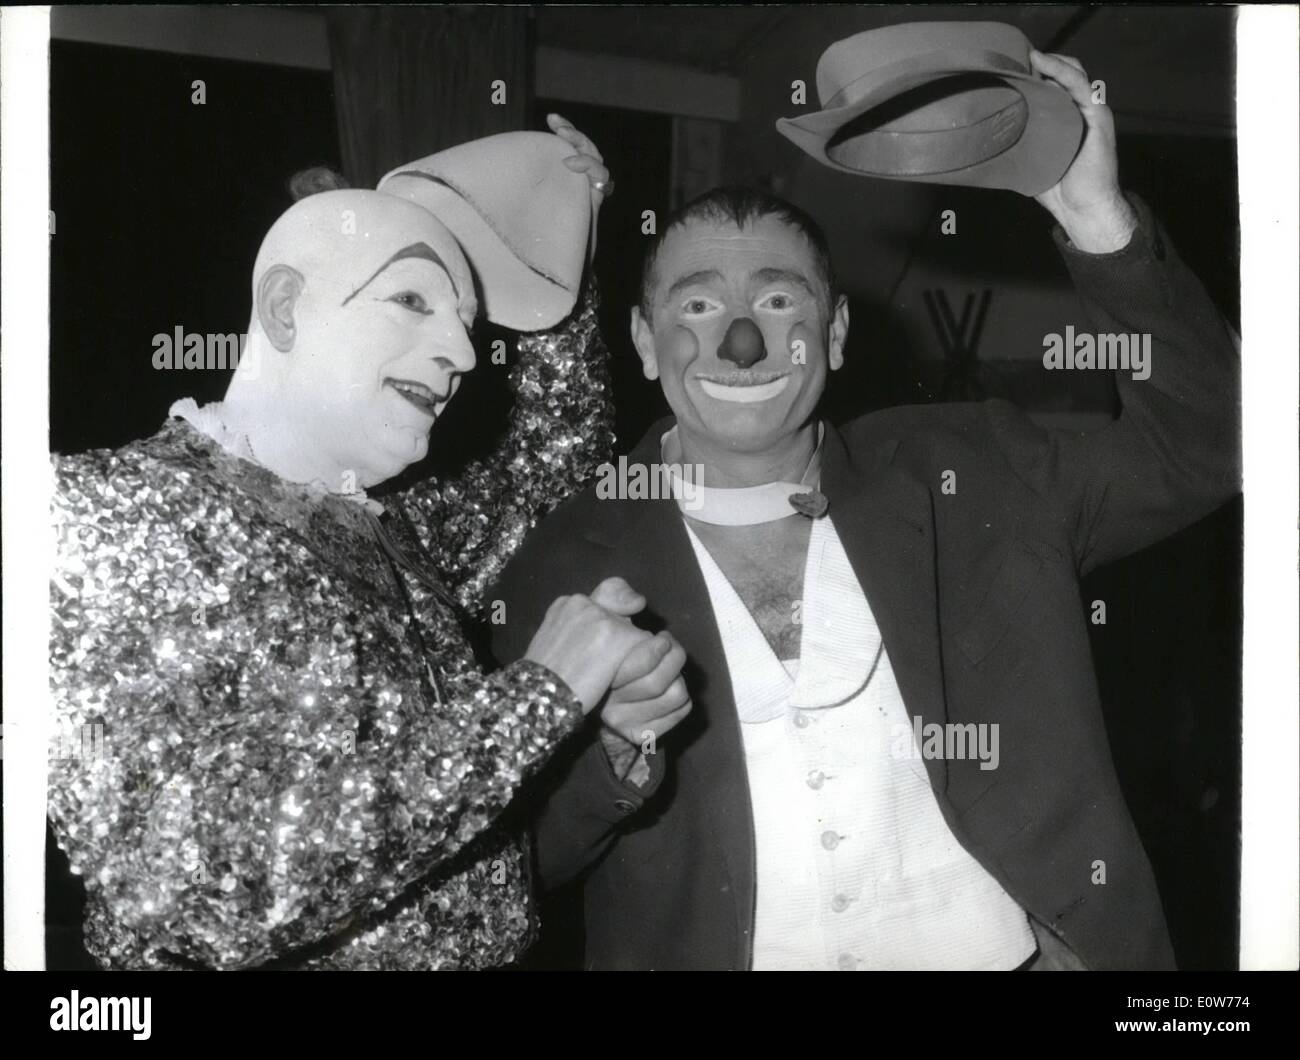 Dec. 12, 1961 - Zavatta makes a come-back: After several years of absence form the circus, Zavatta the famous French clown is now performing at Medrano. Photo shows Zavatta (right) meets another famous clown Alex. Stock Photo